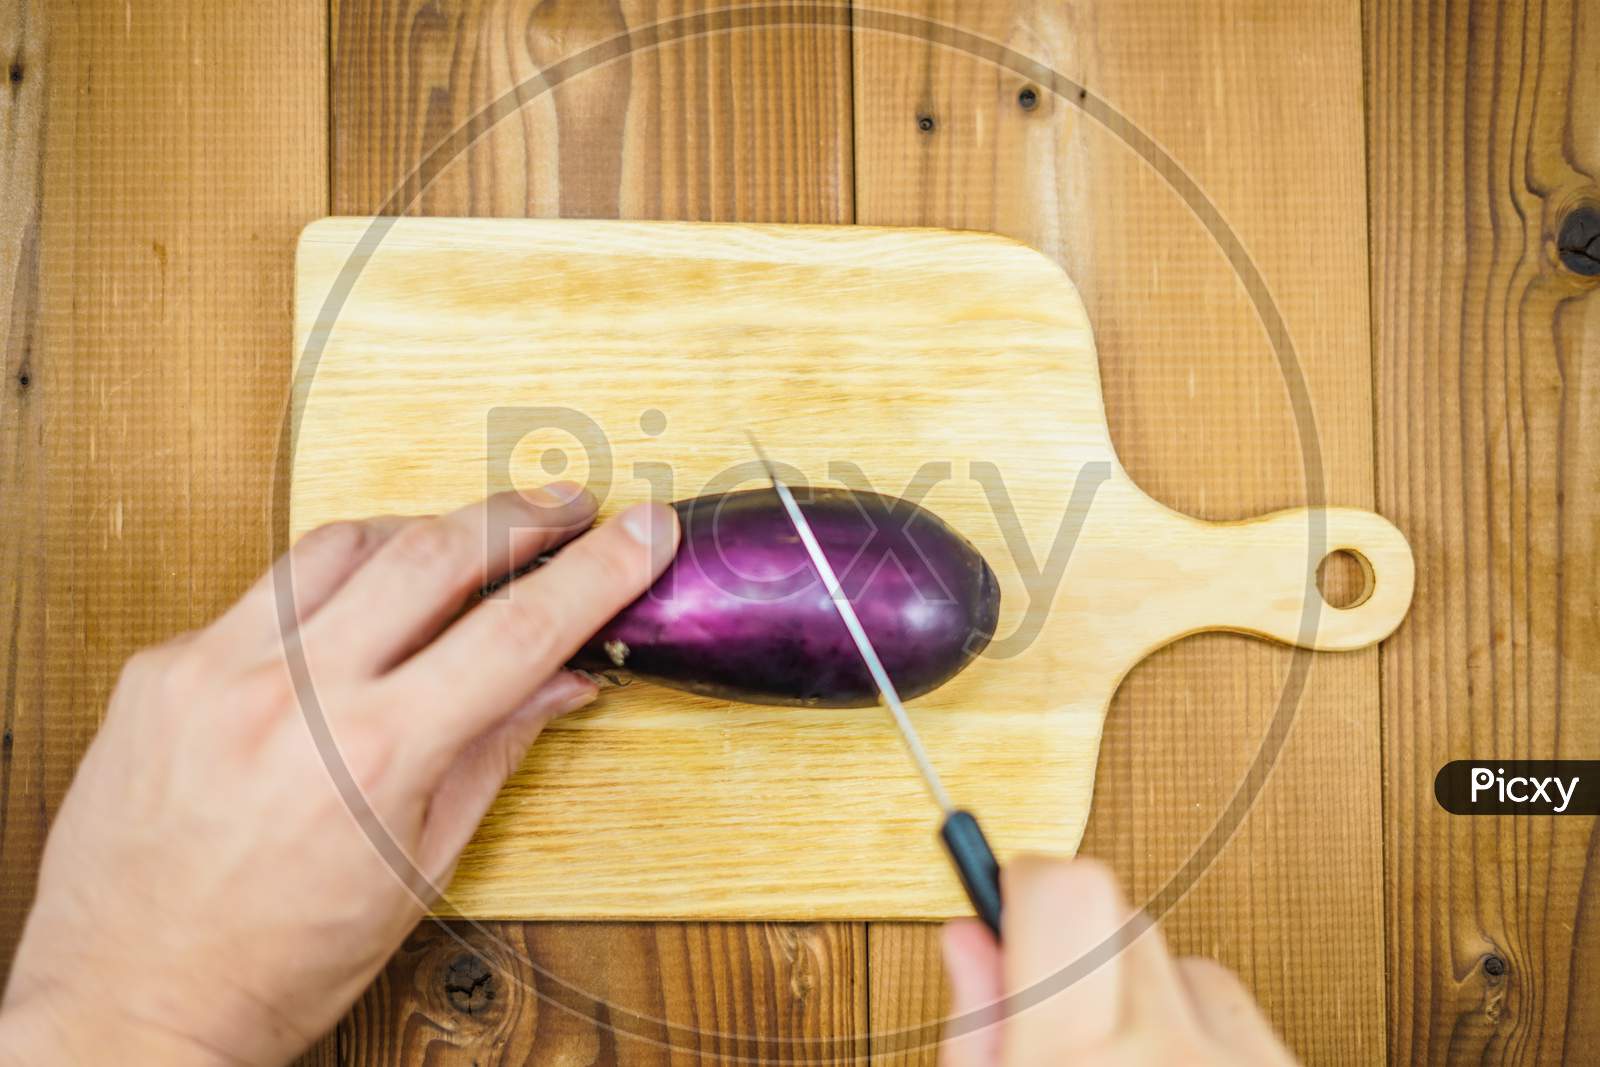 Image To Cut The Eggplant In A Cutting Board